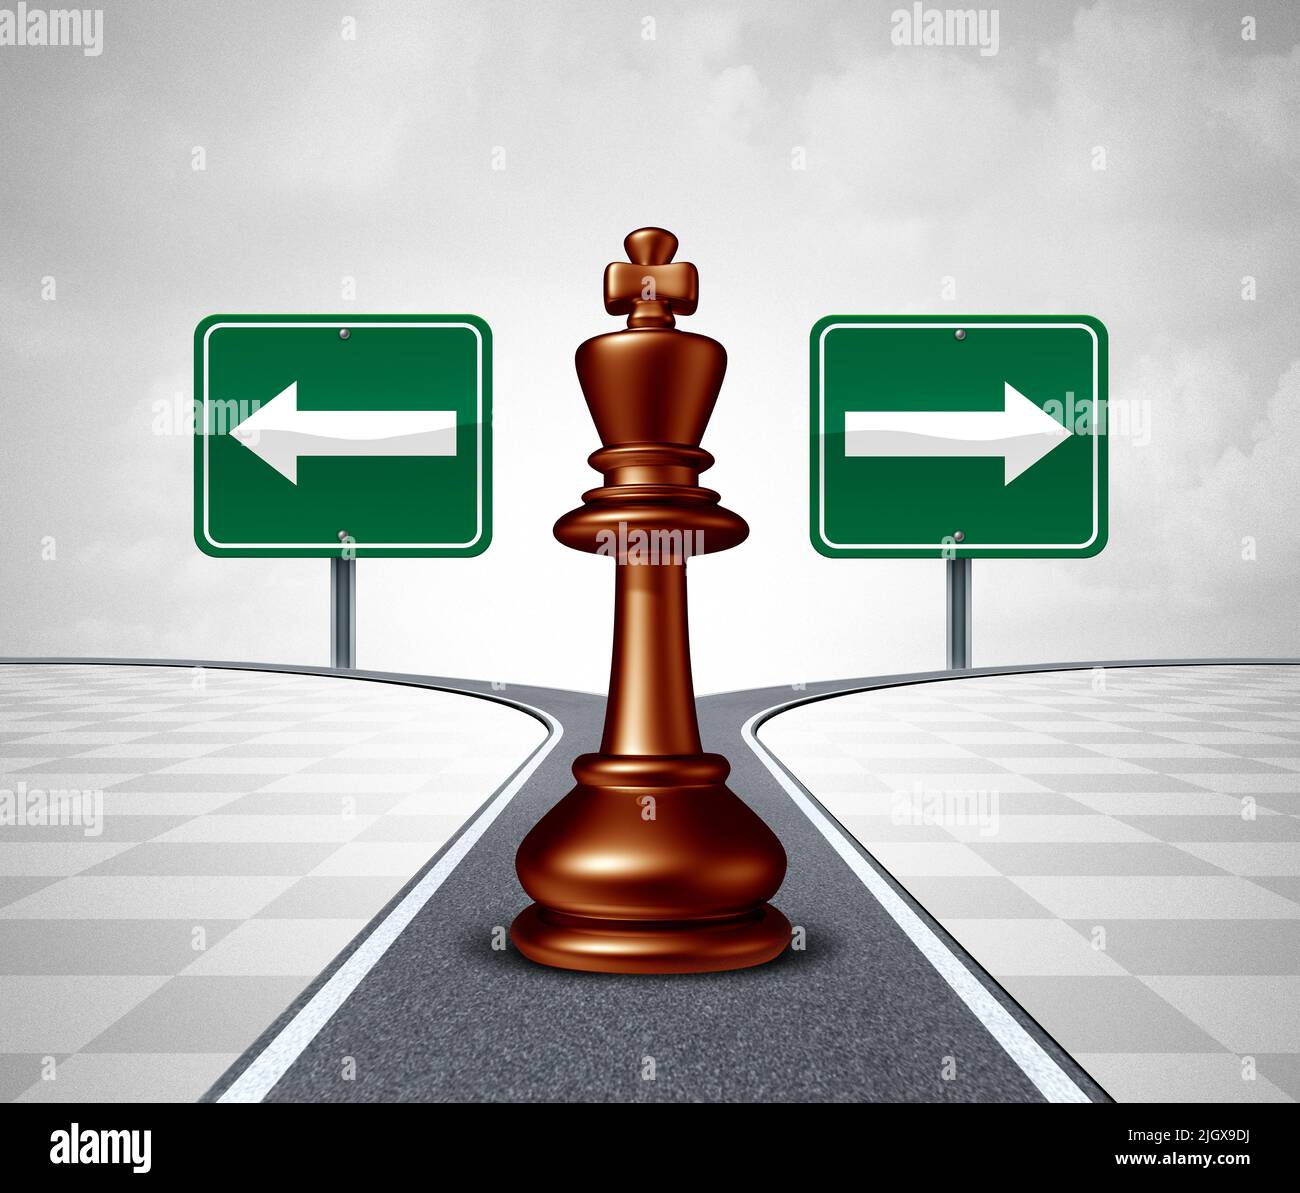 Strategy Direction Decision as a business game plan or life choice and guidance to decide and choose the best way forward to succeed as a crossroads. Stock Photo